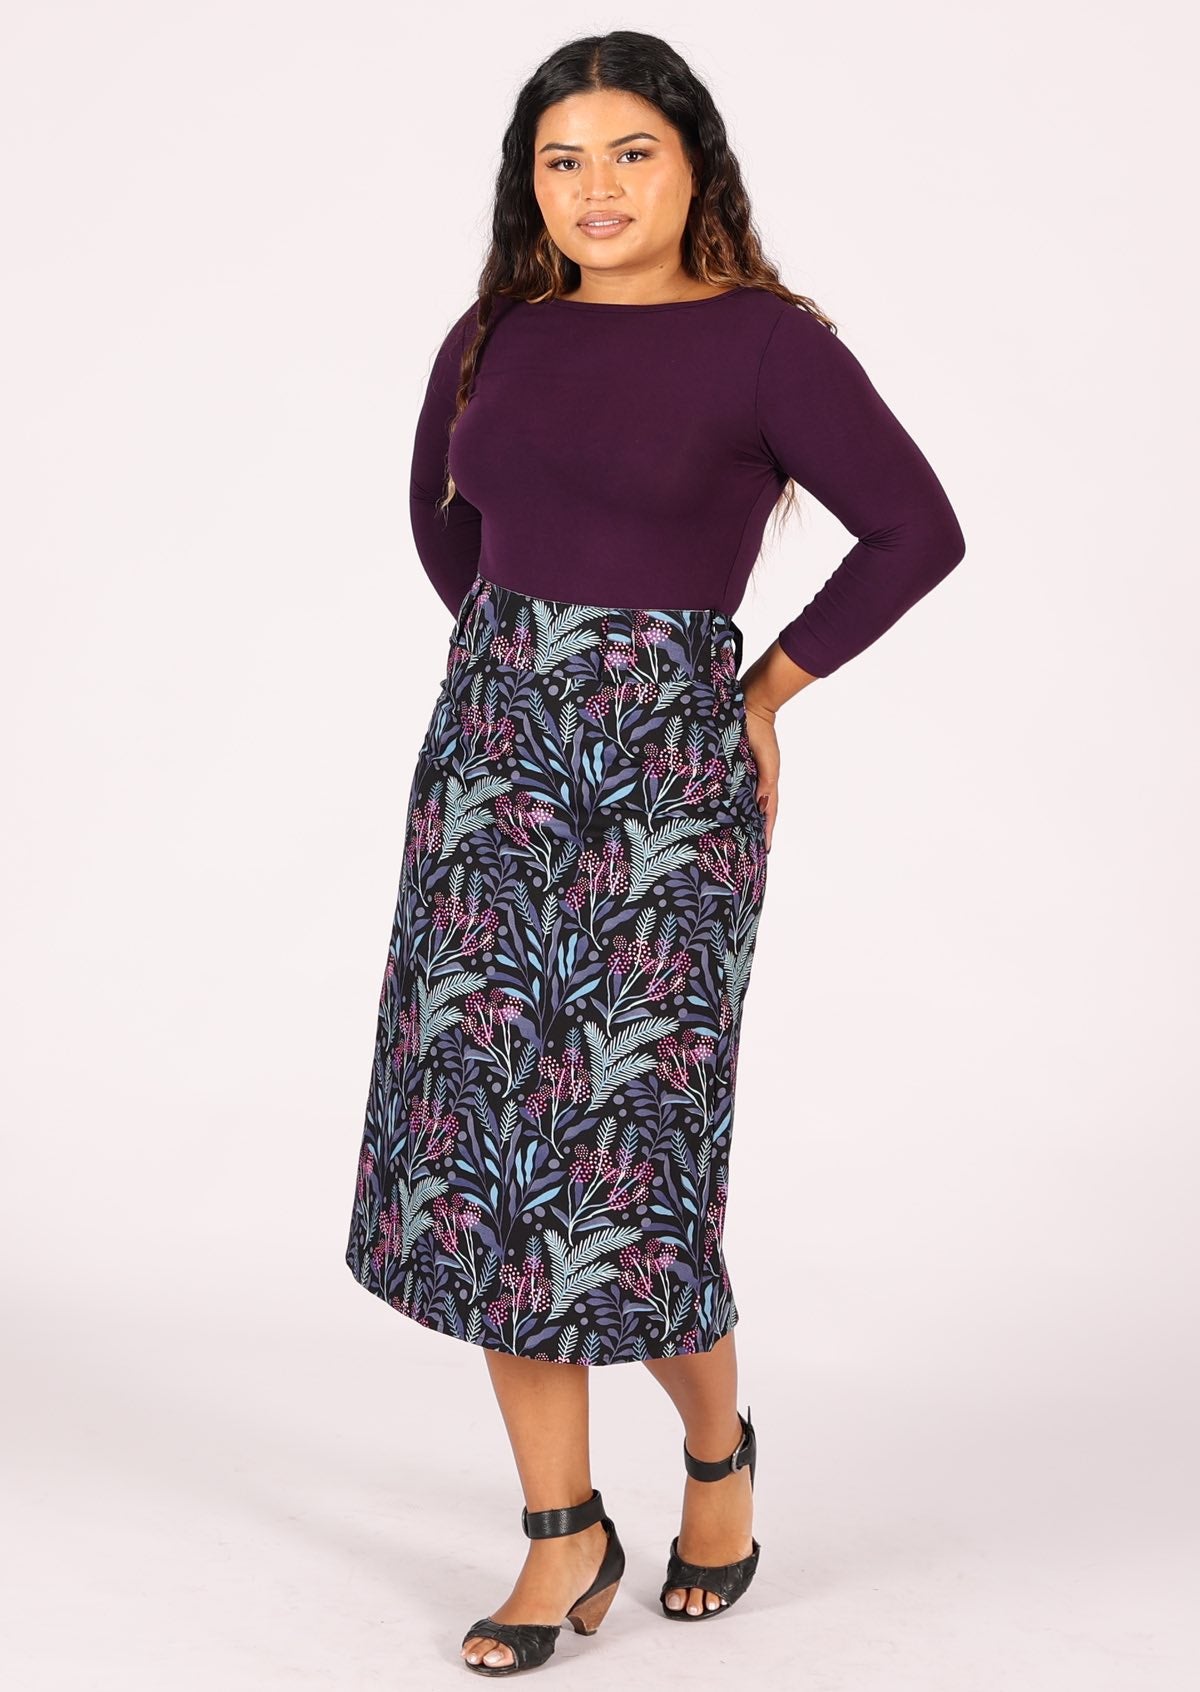 100% cotton midi length skirt with belt loops and back pockets